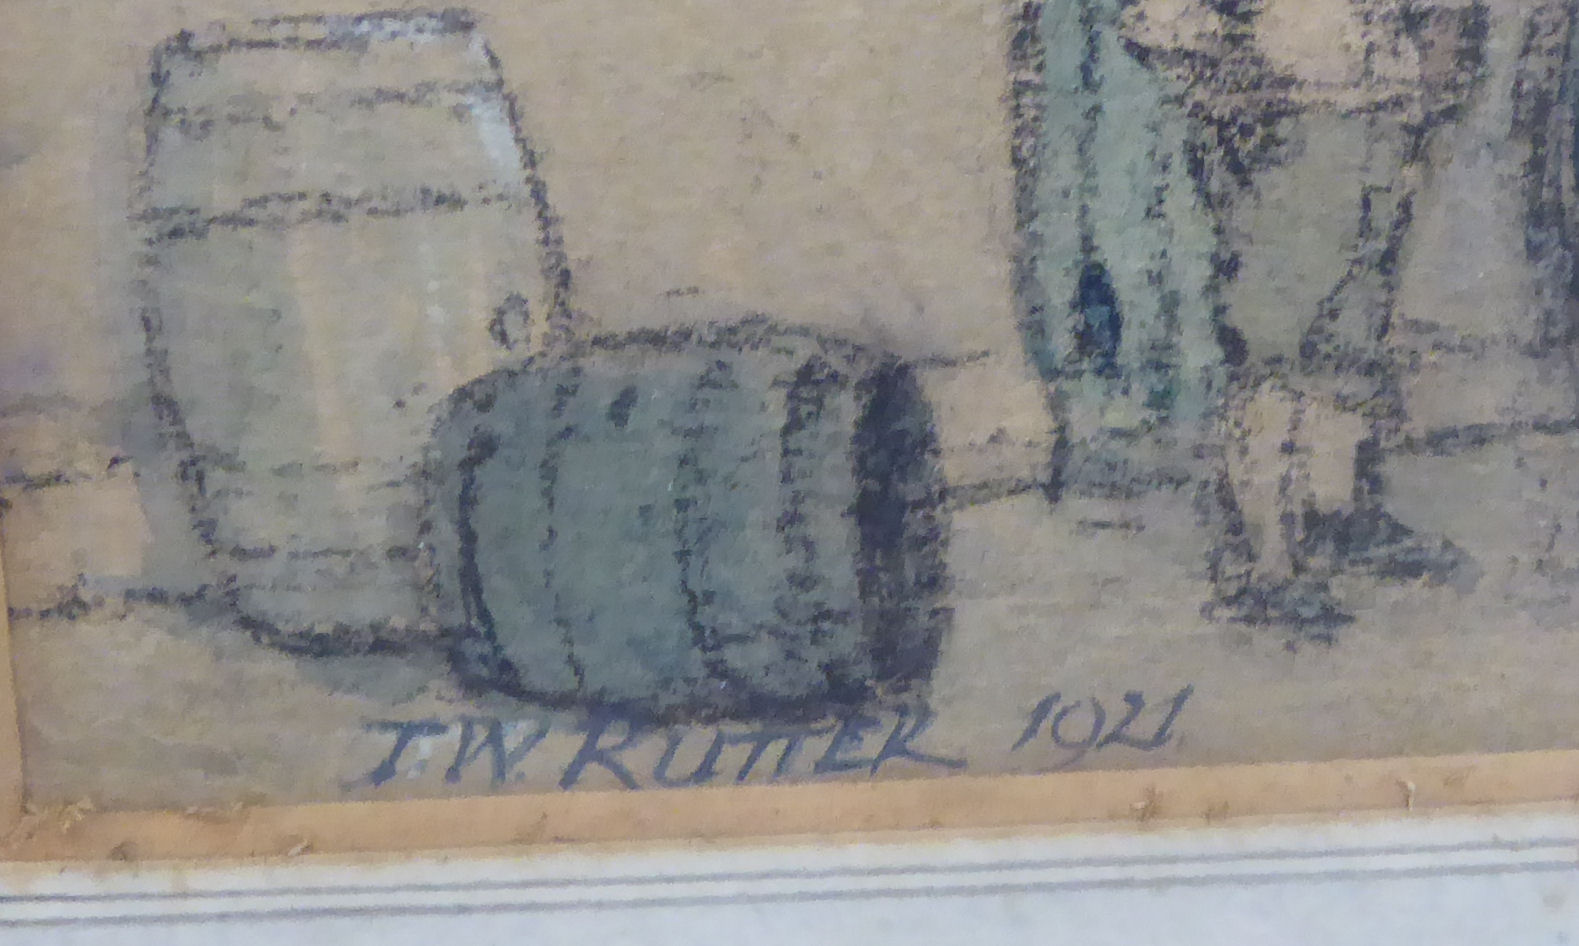 TW Rutter - draymen unloading barrels pastel/watercolour bears a signature & dated 1921 16'' x - Image 3 of 3